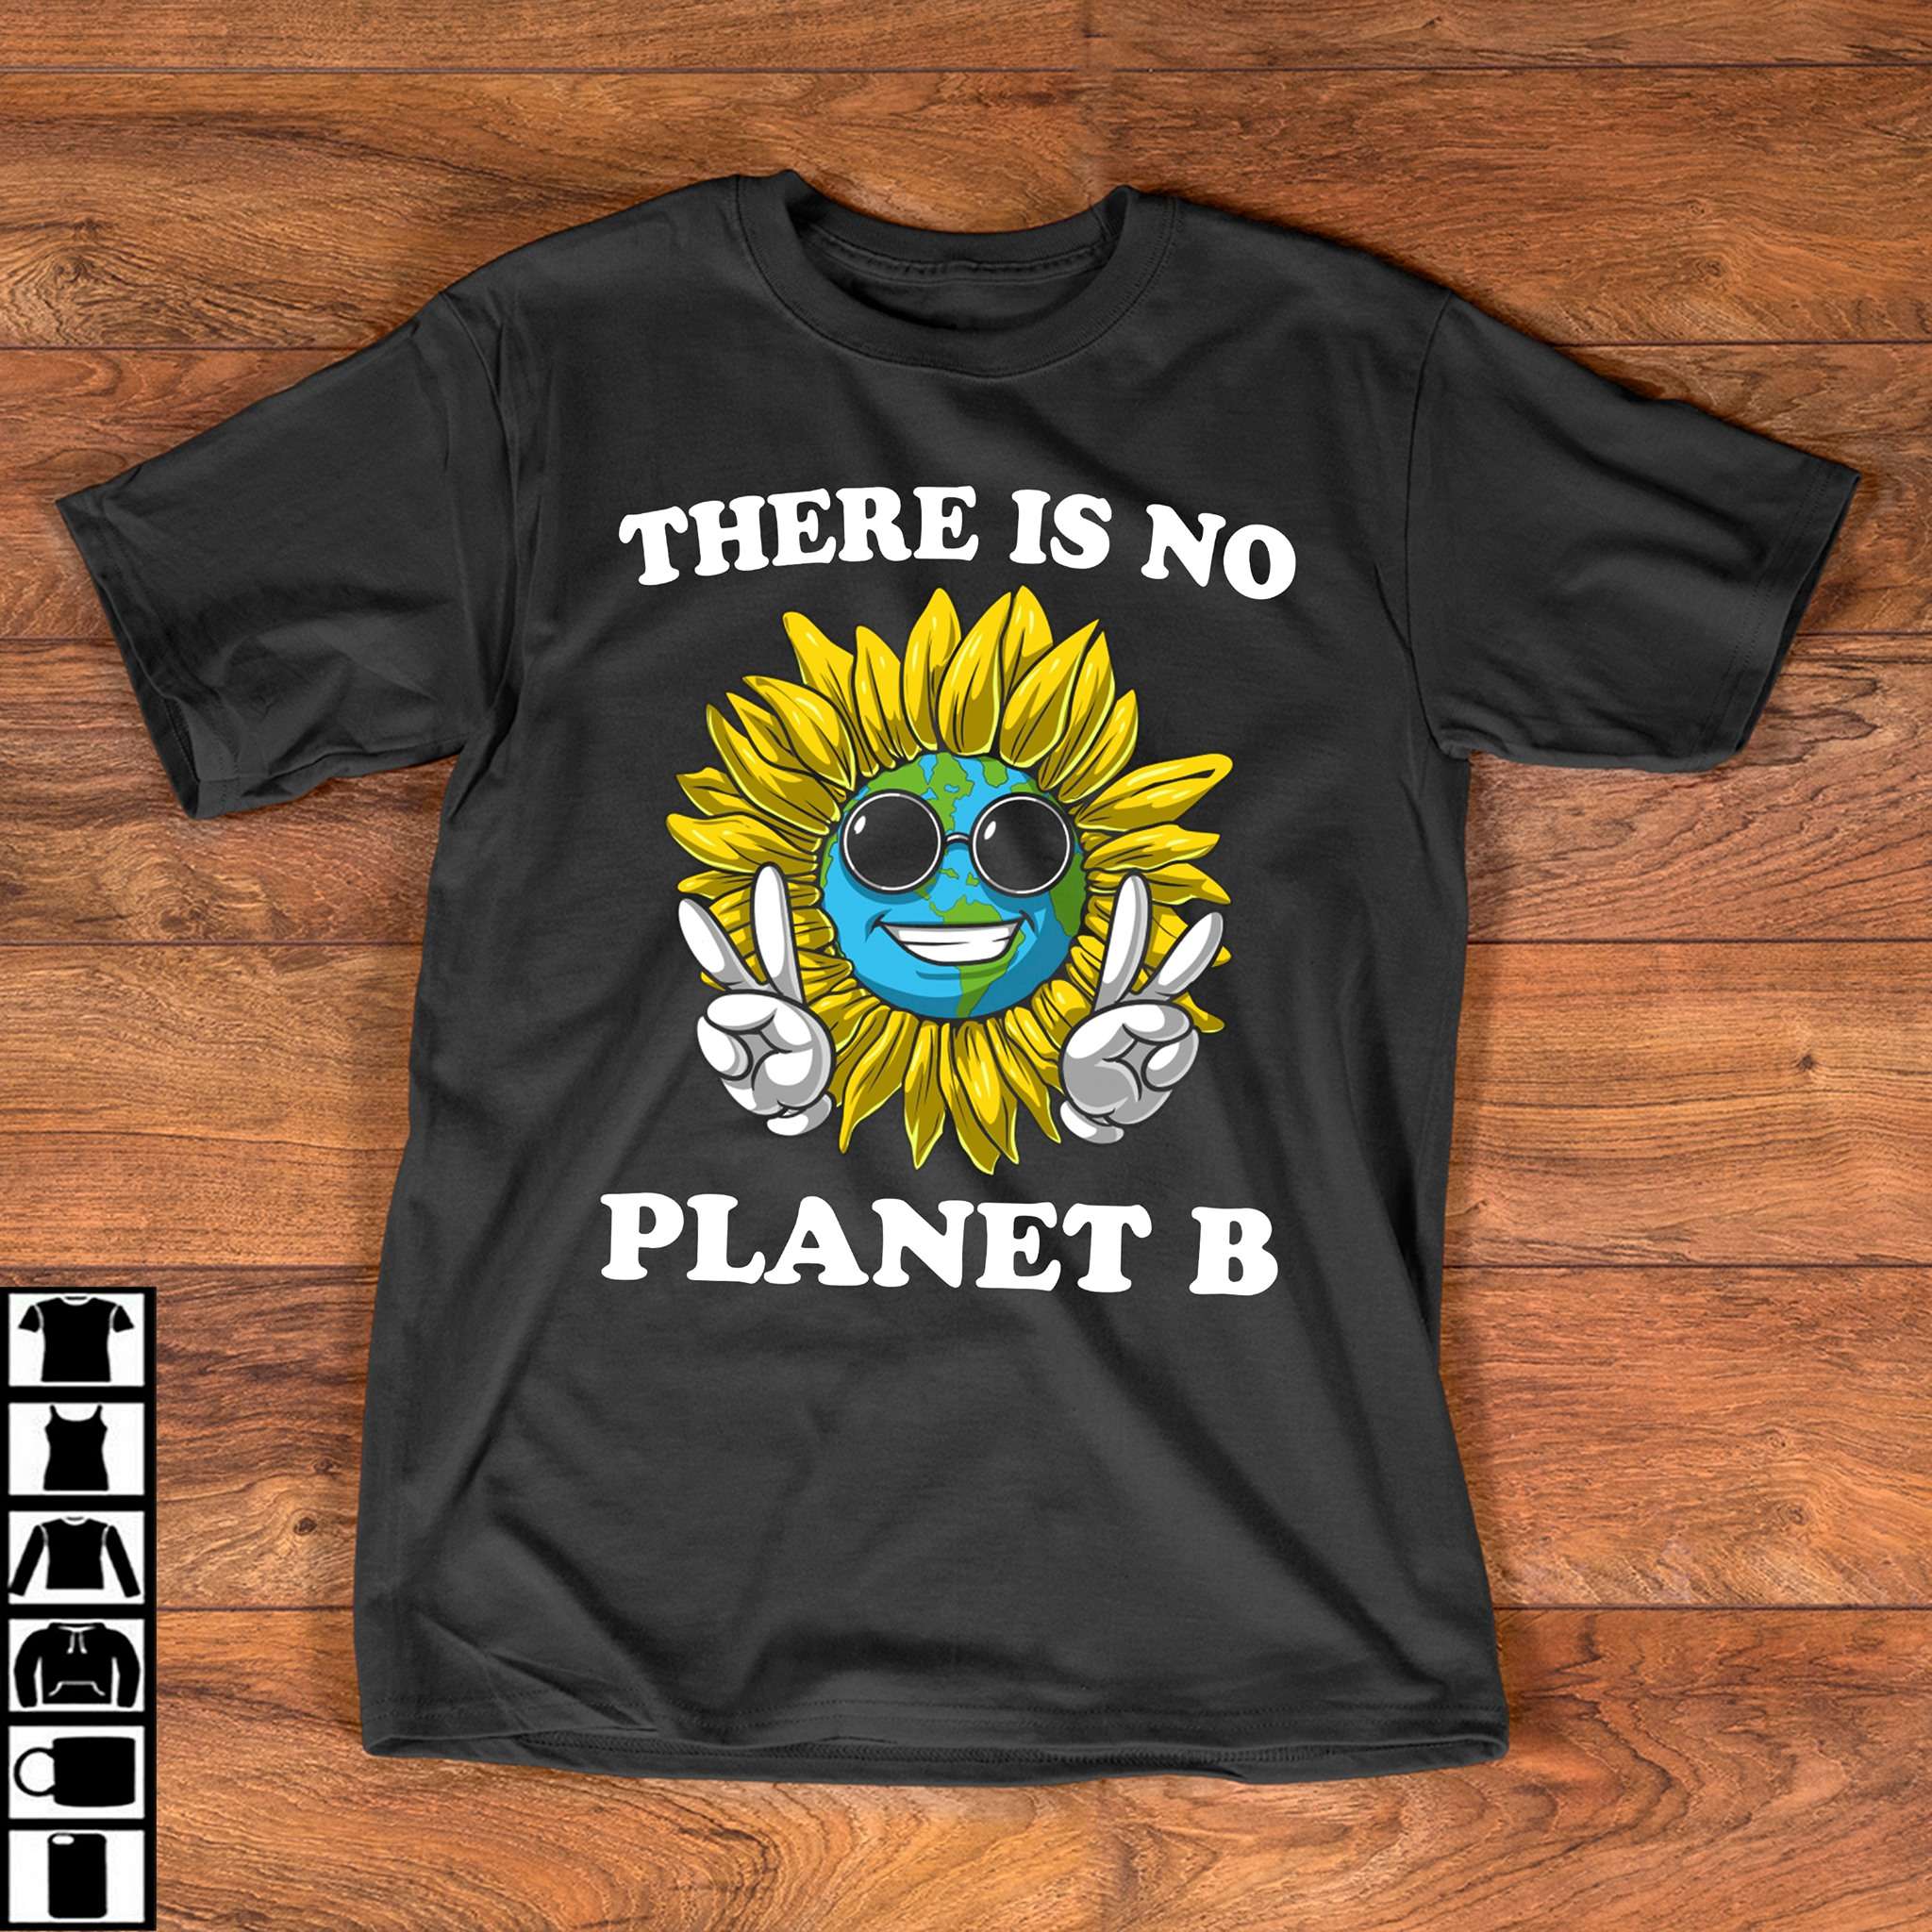 There is no planet B - Sunflower Earth, the only planet the Earth